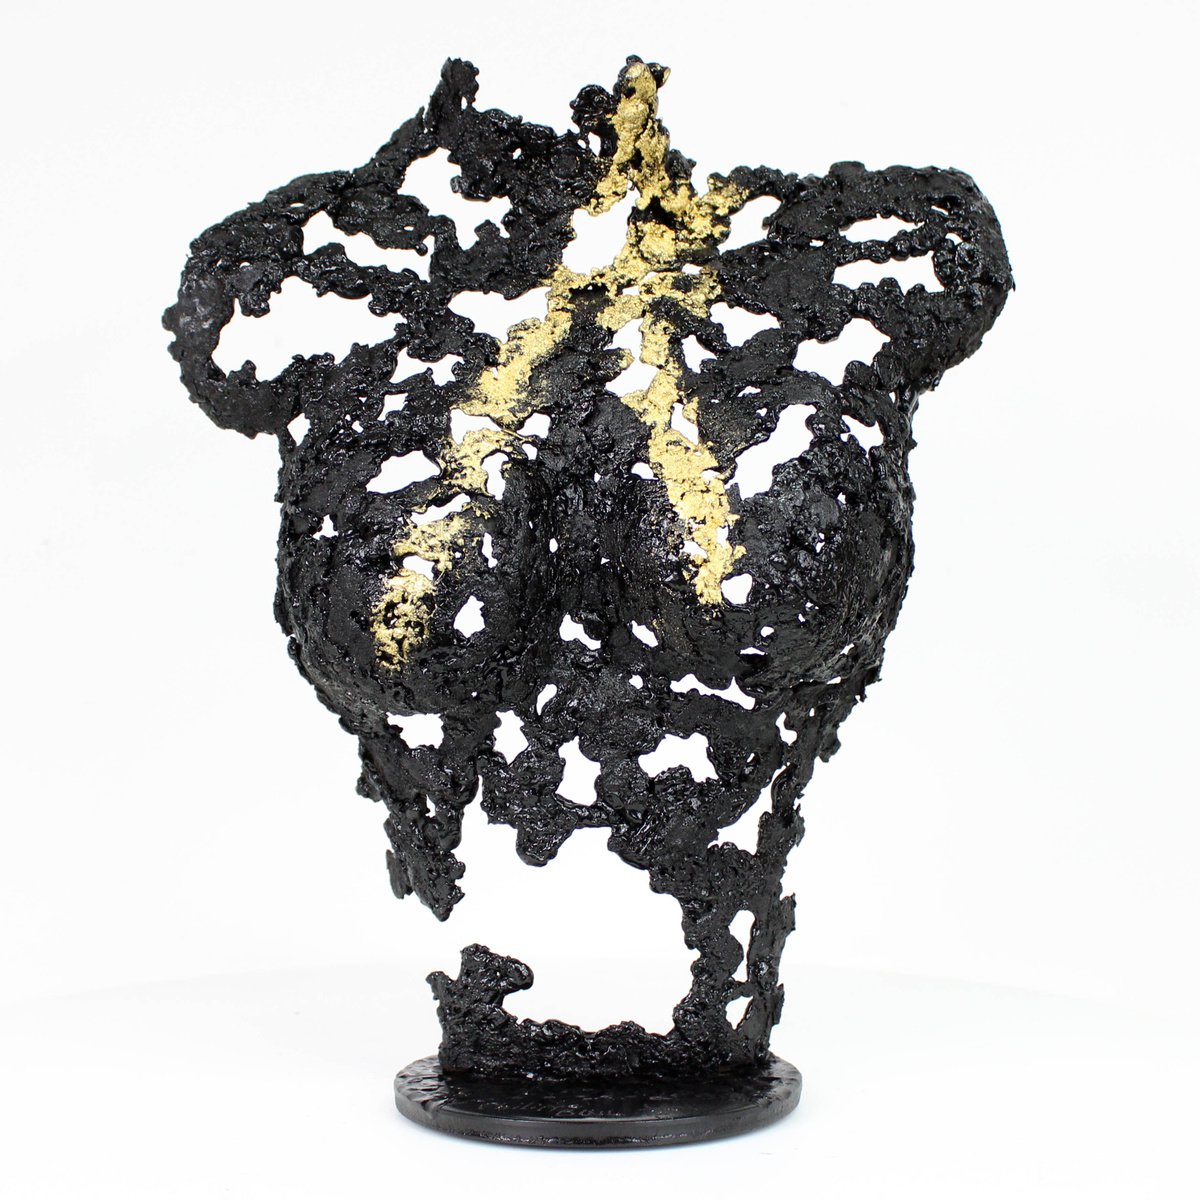 Pavarti Lightening- Woman bust sculpture in metal, lace steel and gold by Philippe Buil